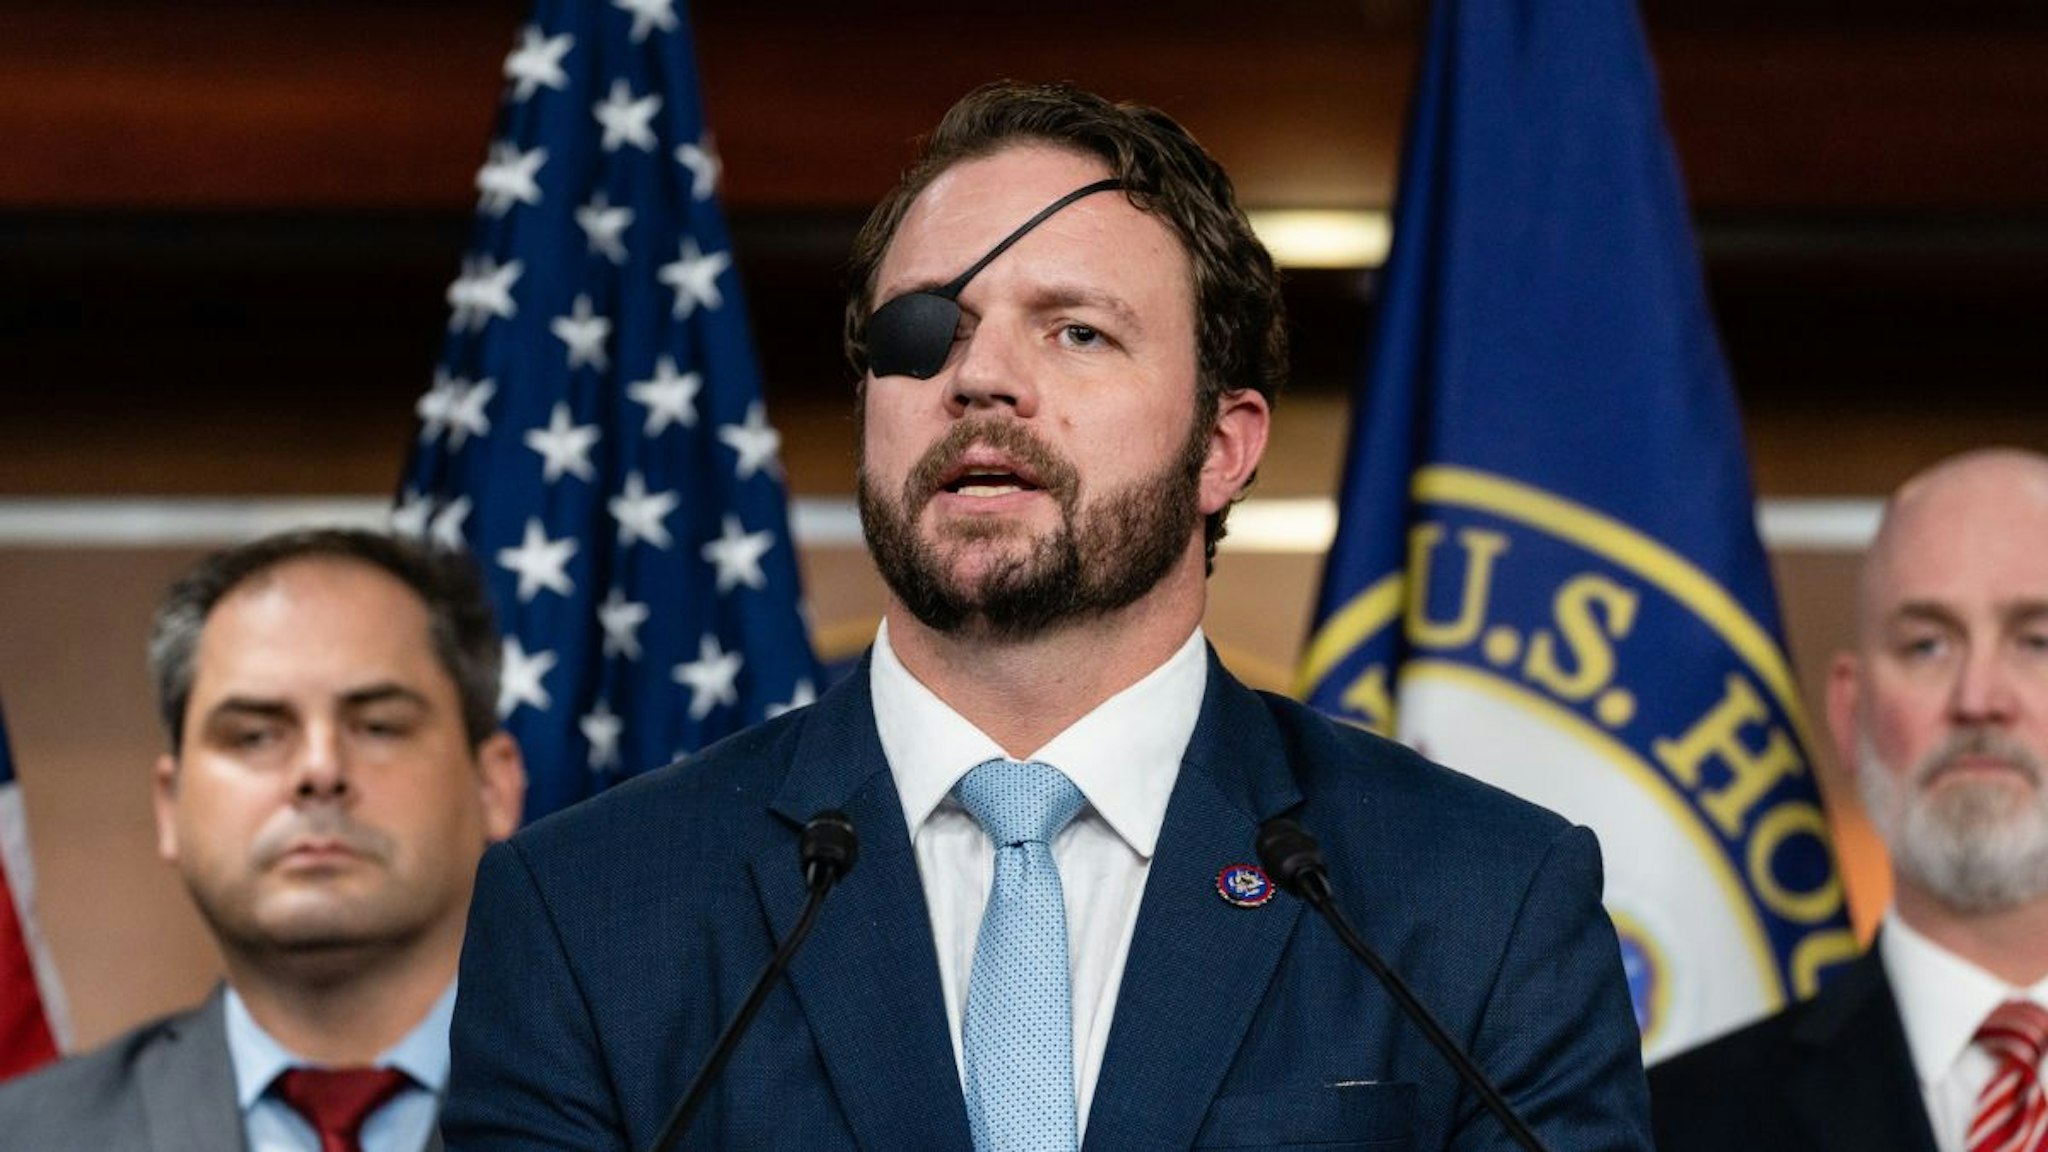 Representative Dan Crenshaw, a Republican from Texas, speaks during a news conference organized by House Republican veterans at the US Capitol in Washington, DC, US, on Wednesday, Jan. 4, 2023.